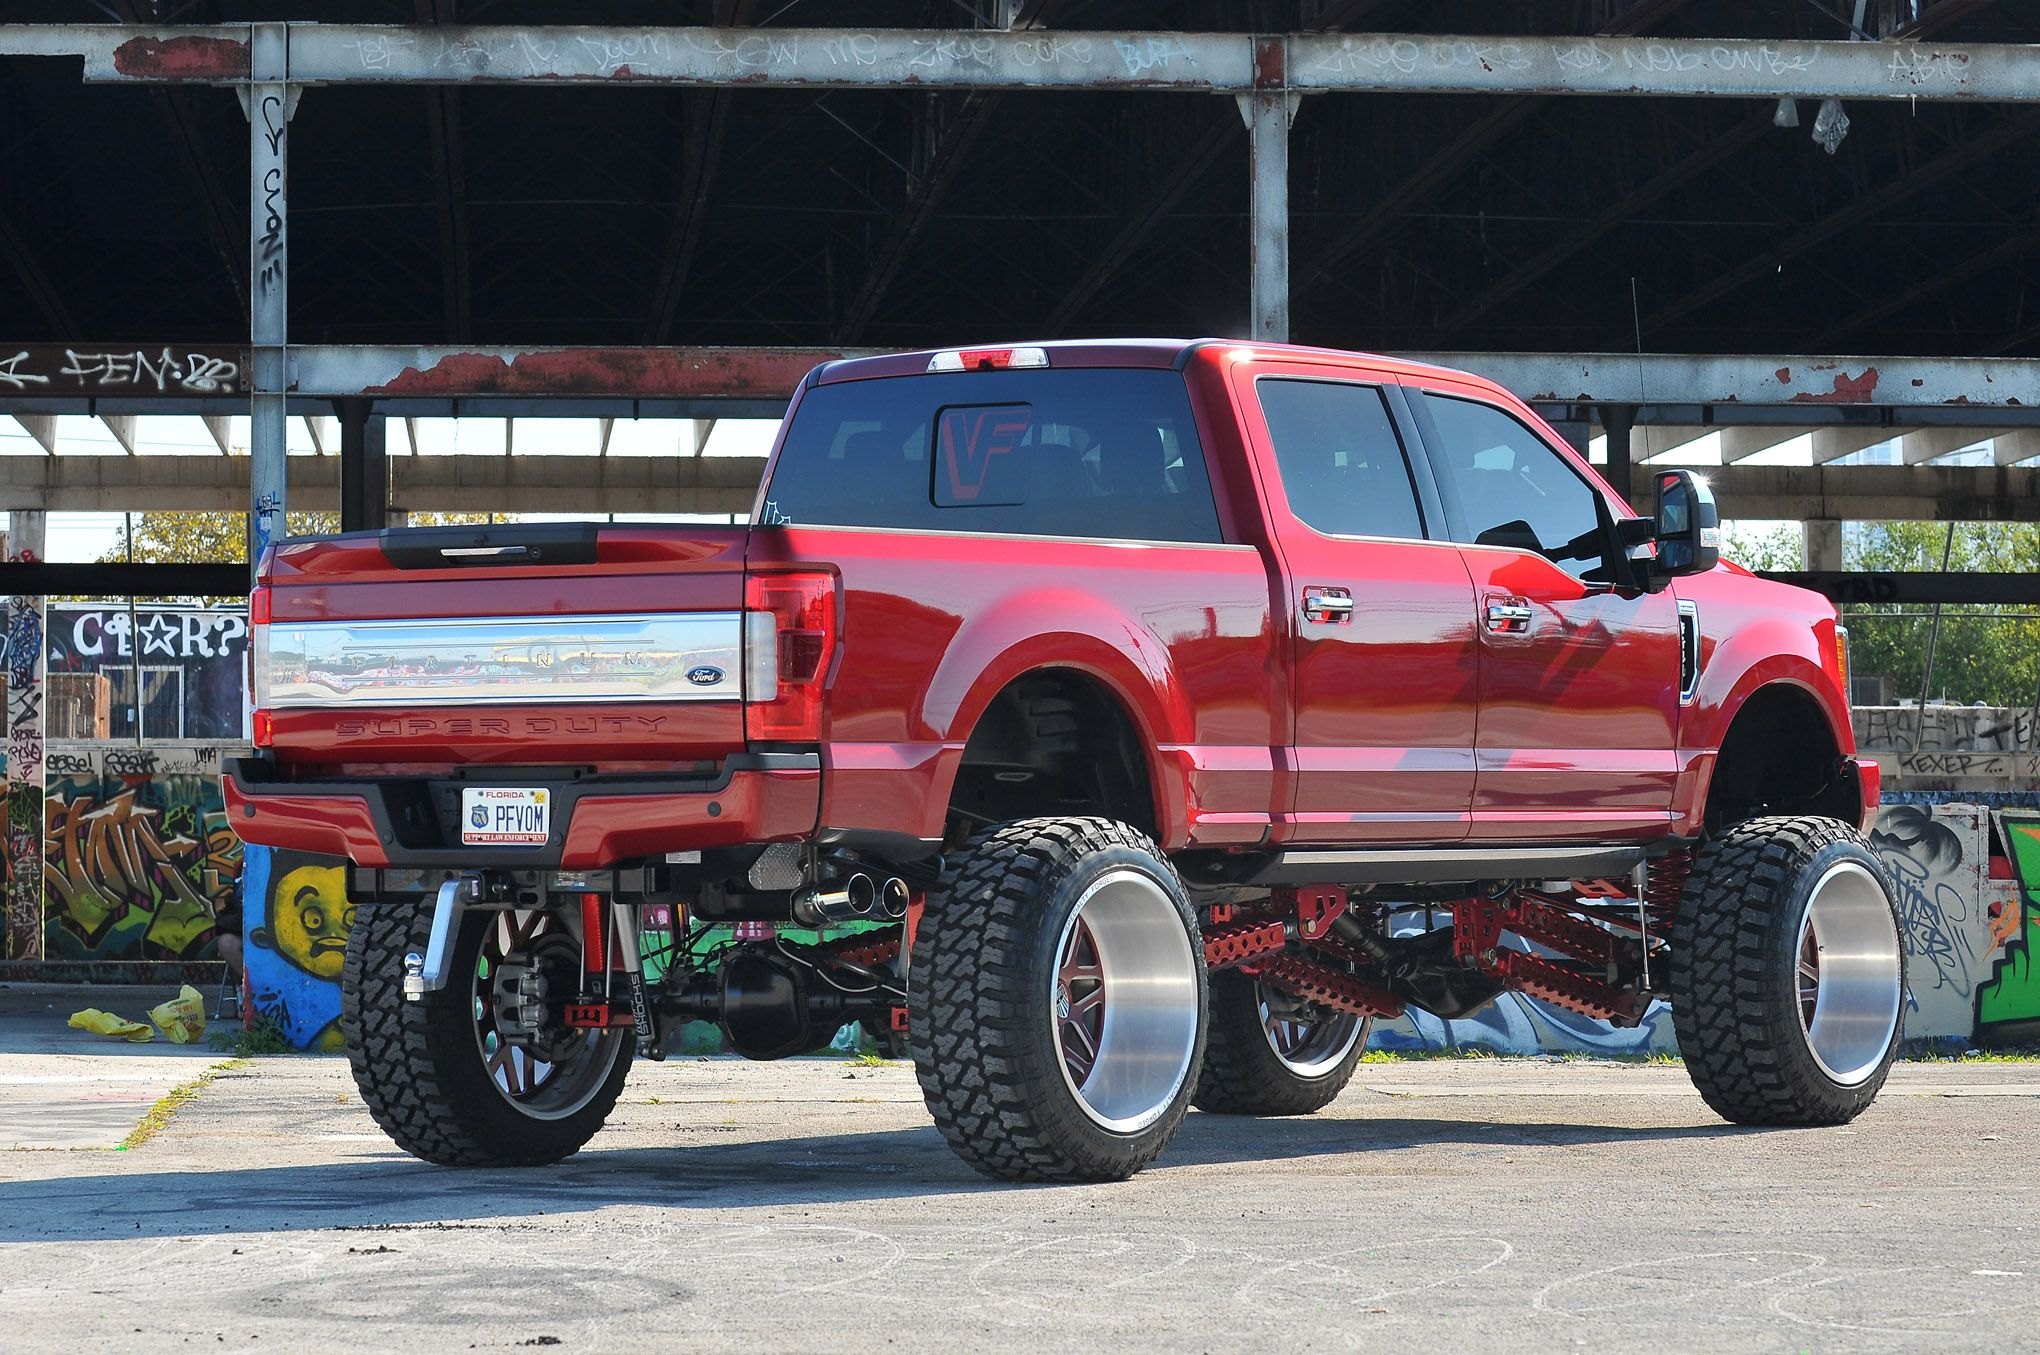 Aftermarket Rear Bumper on Red Lifted Ford F-250 - Photo by Phil Gordon